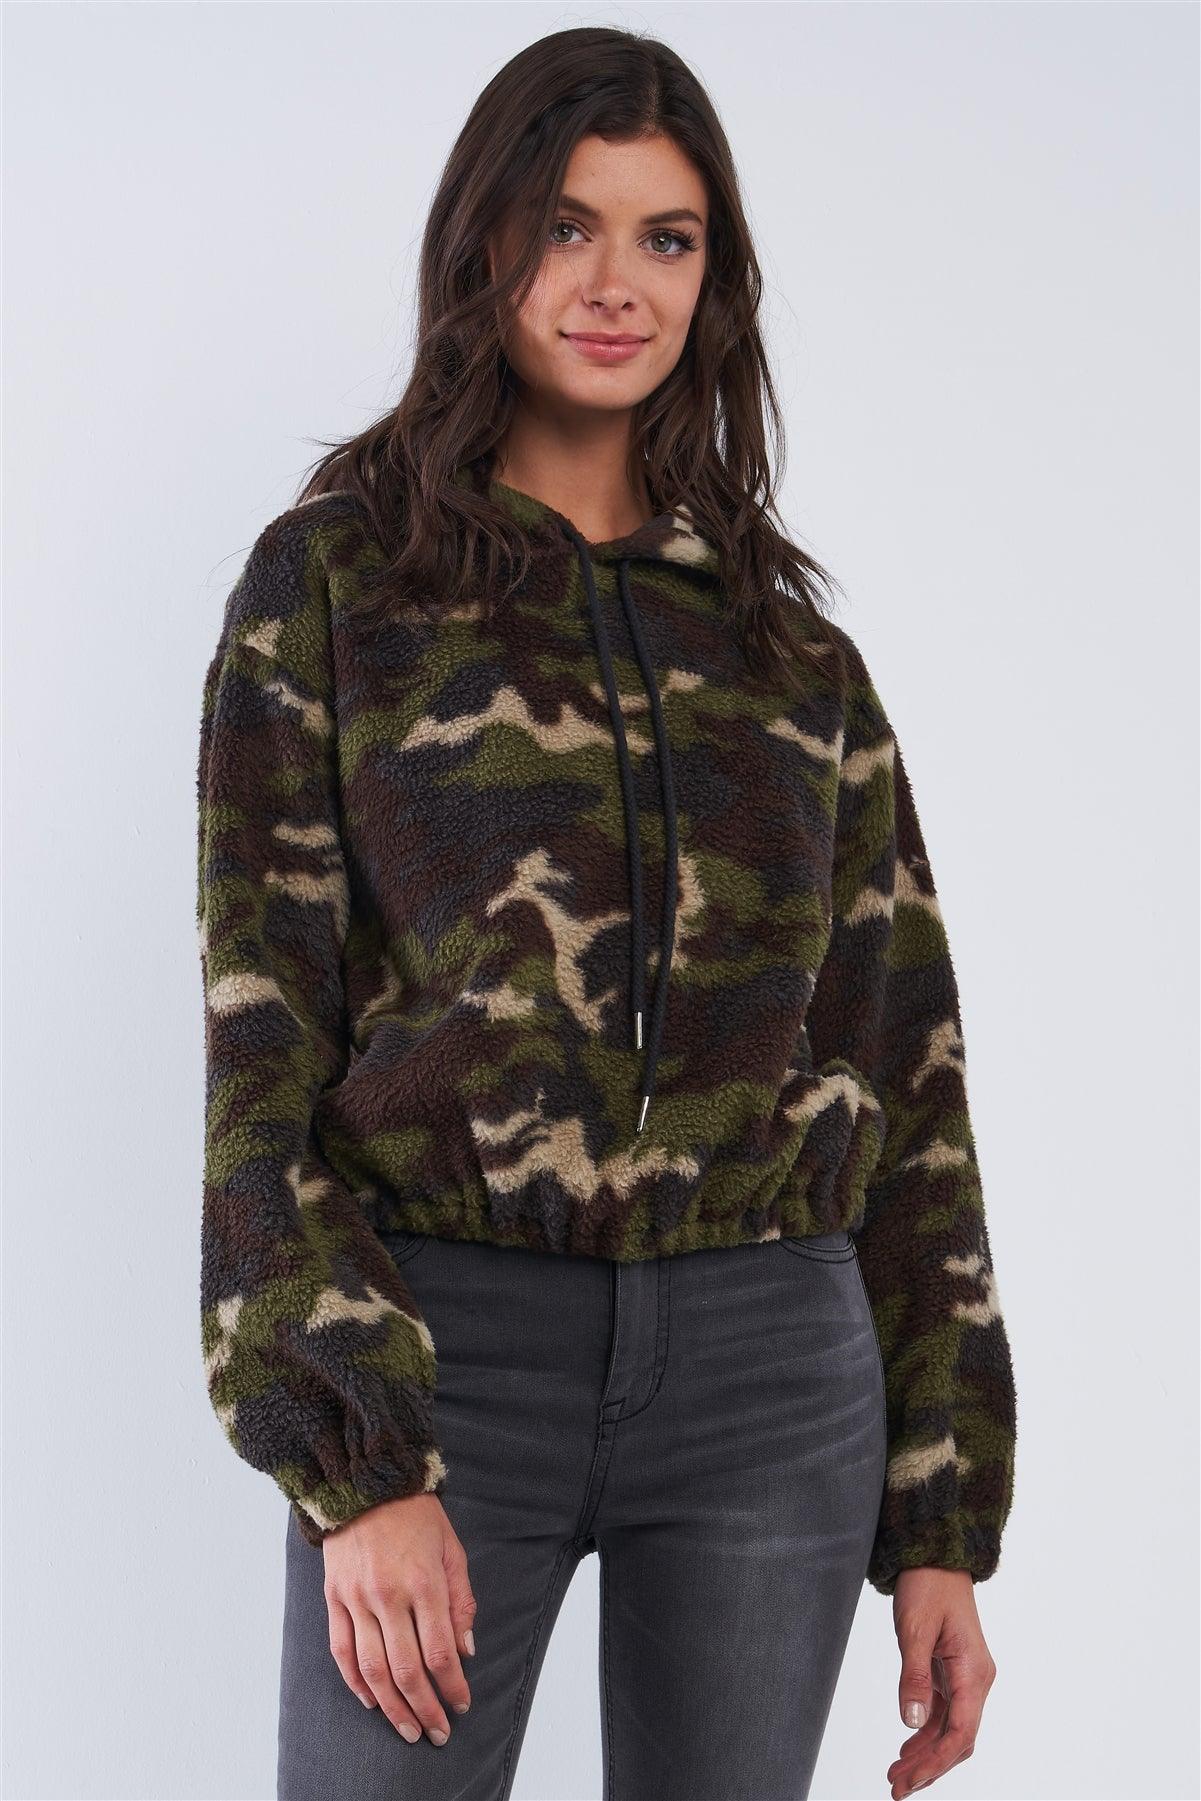 Olive Green Camo Print Plush Relaxed Fit Long Sleeve Draw String Tie Hoodie Sweater /3-2-1